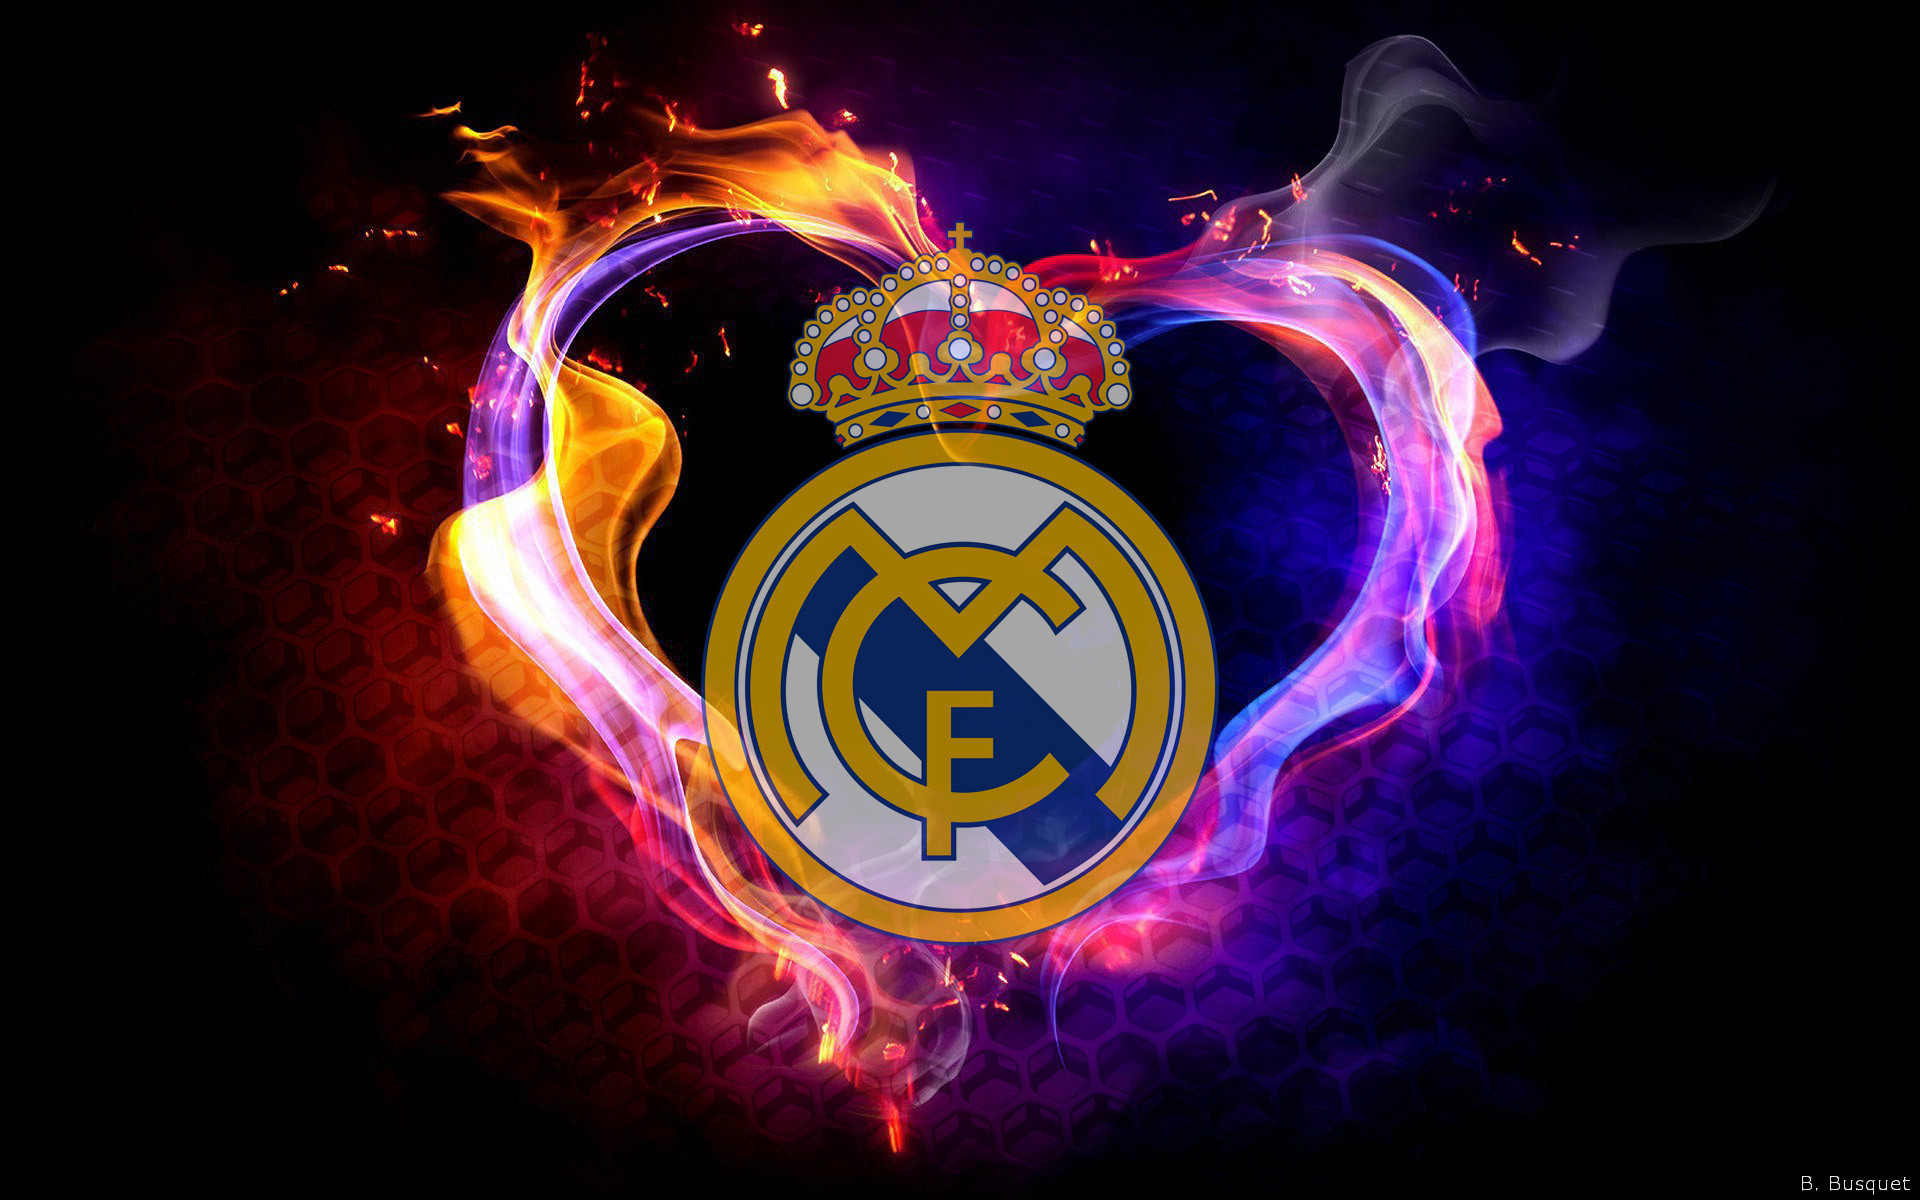 Real Madrid wallpaper with fire